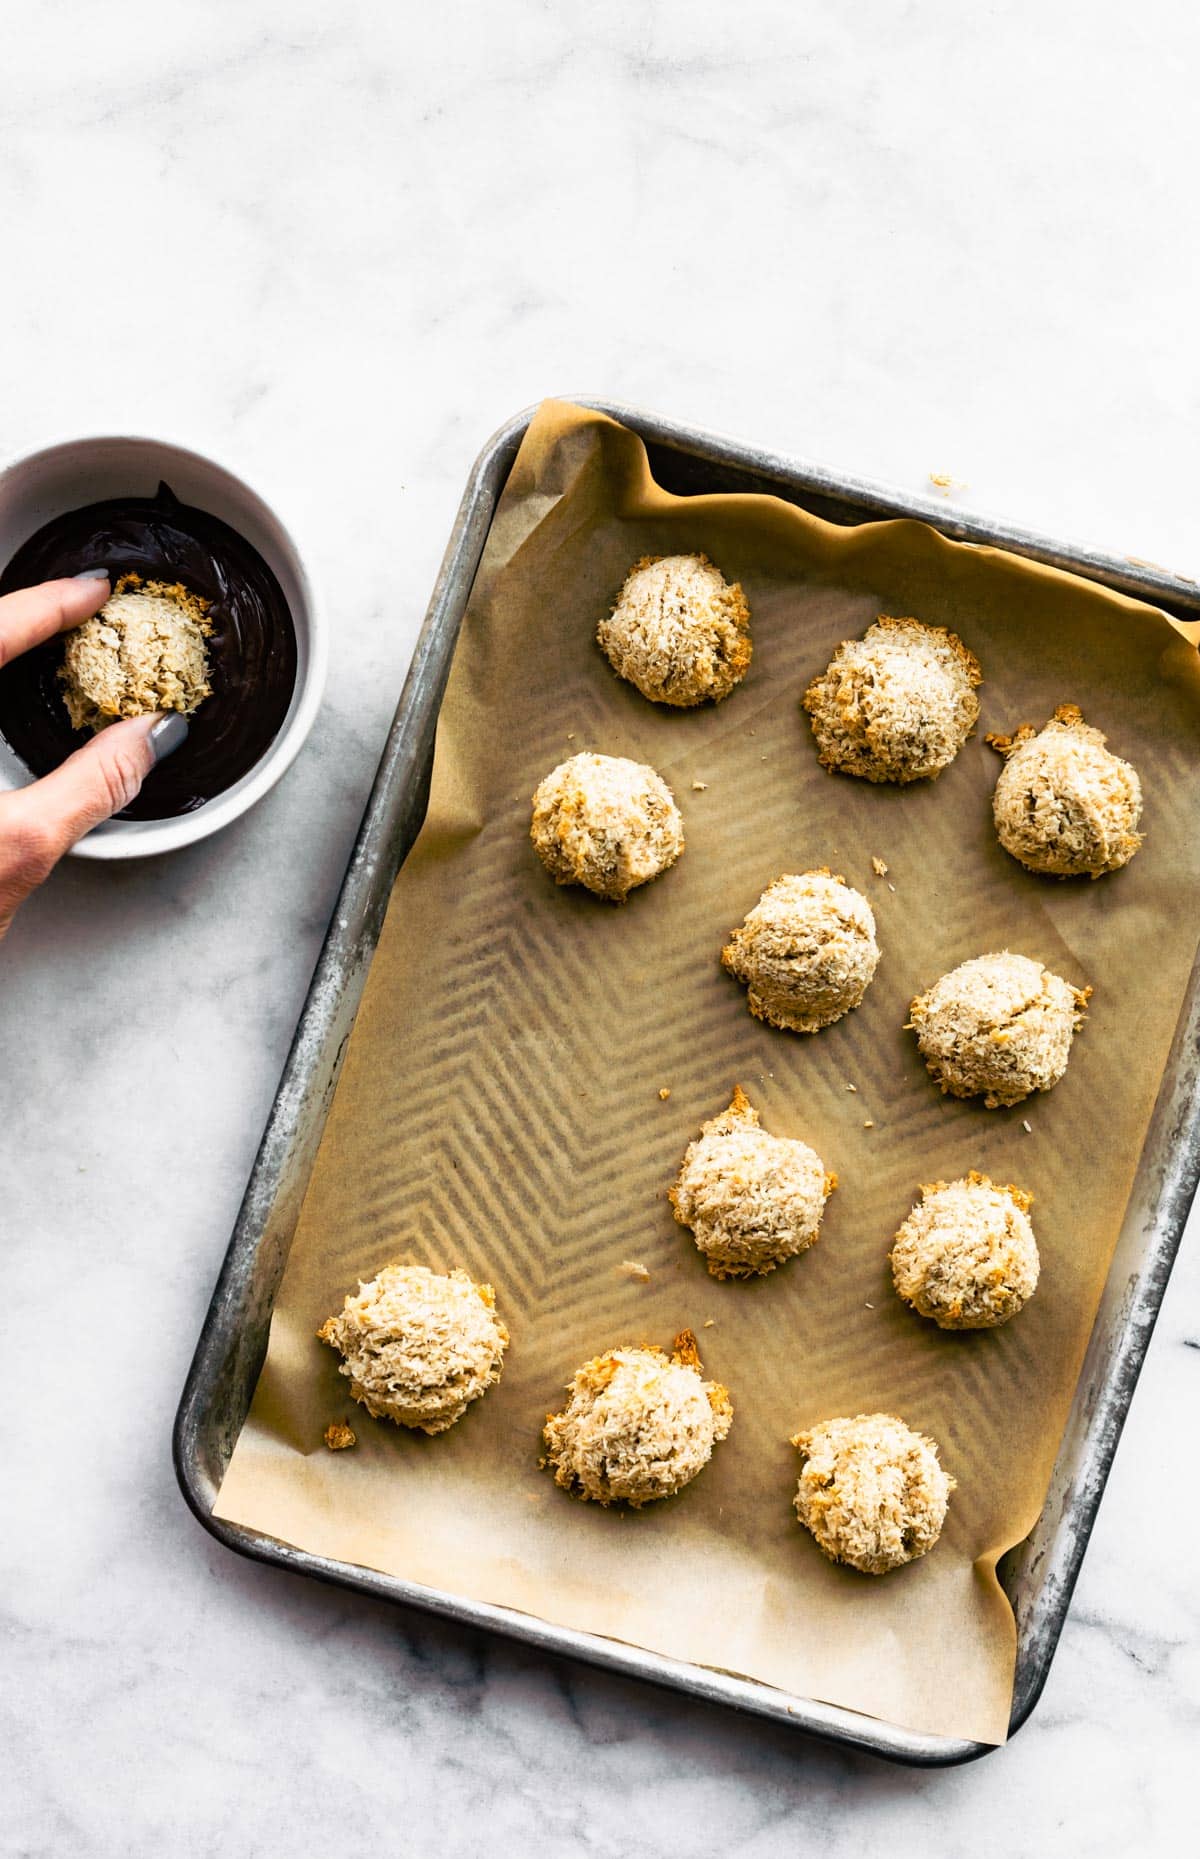 a sheet pan full of vegan gluten free mocha coconut macaroons with a hand dipping one into dark chocolate